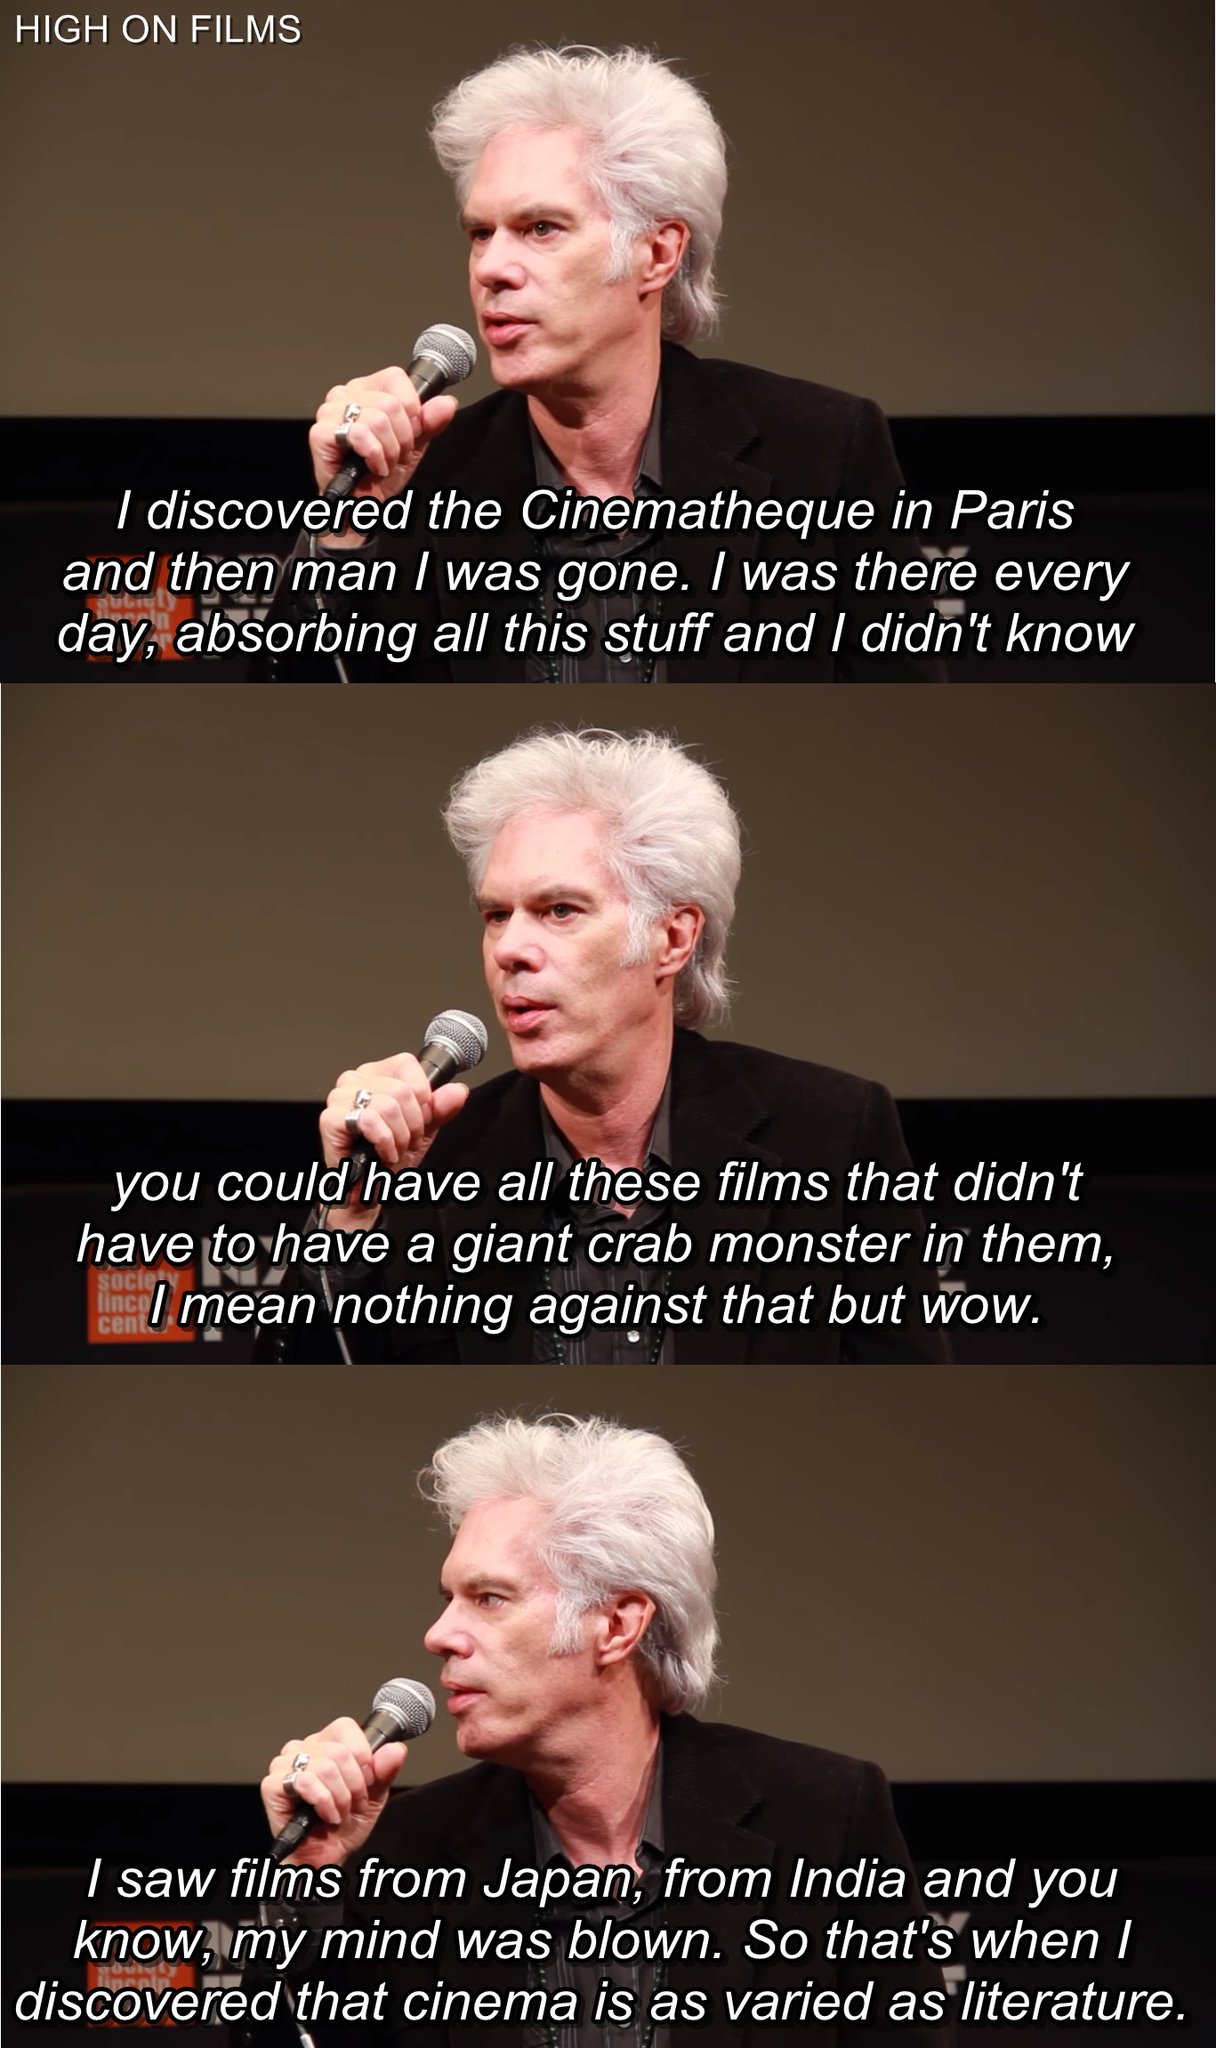 Jim Jarmusch on discovering Independent & Art-House Cinema for the first time.

Happy Birthday, Jim! 